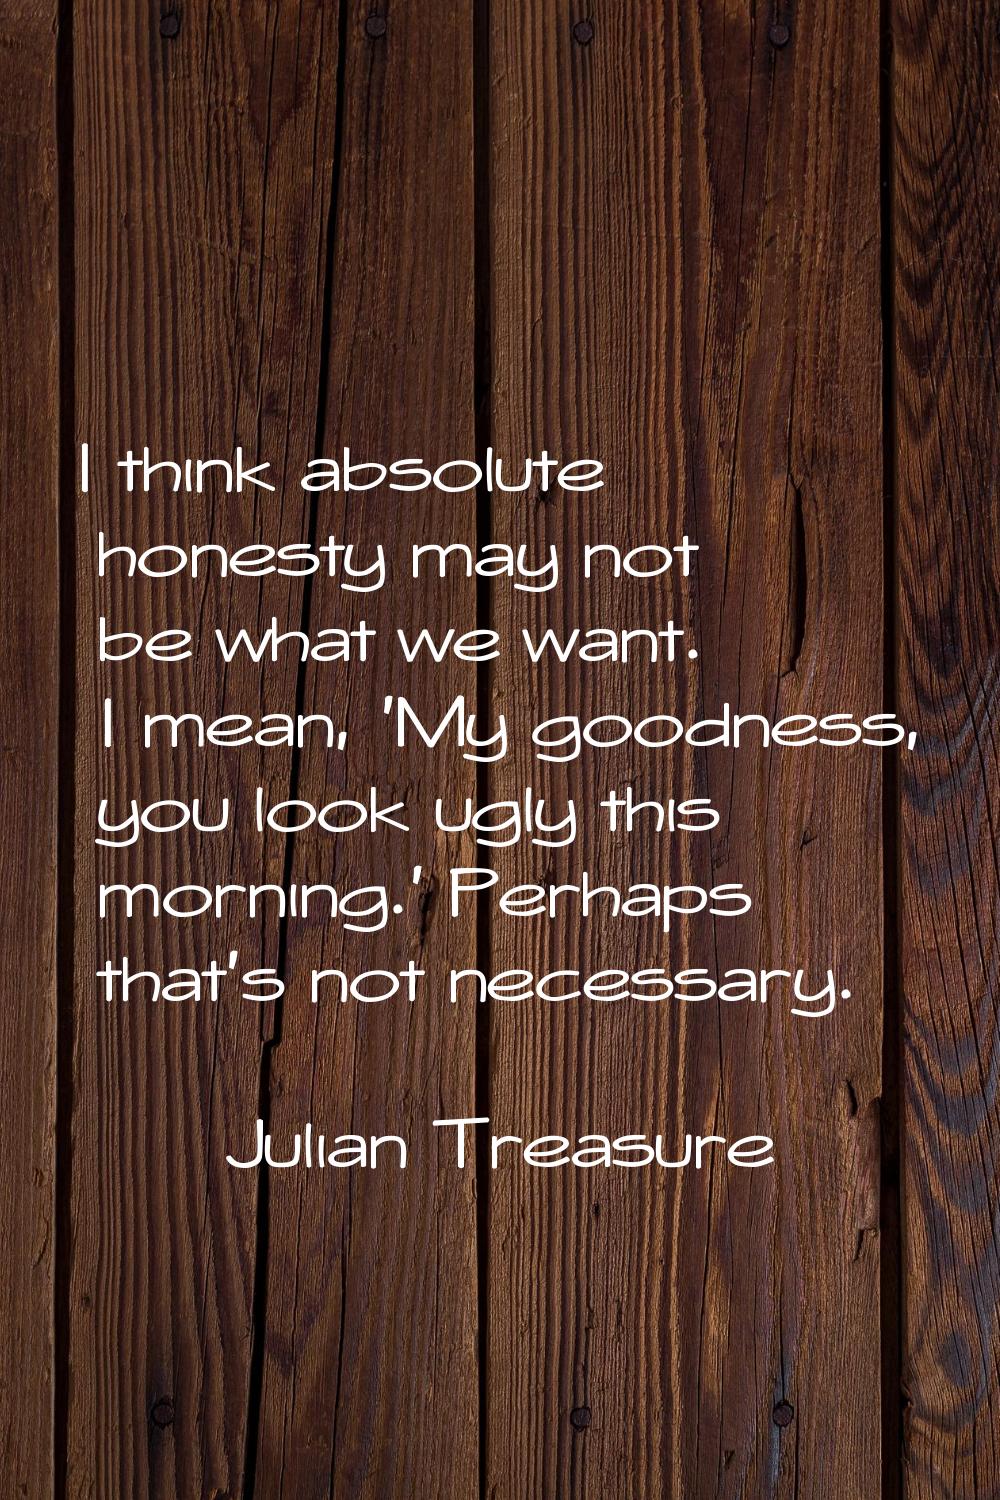 I think absolute honesty may not be what we want. I mean, 'My goodness, you look ugly this morning.